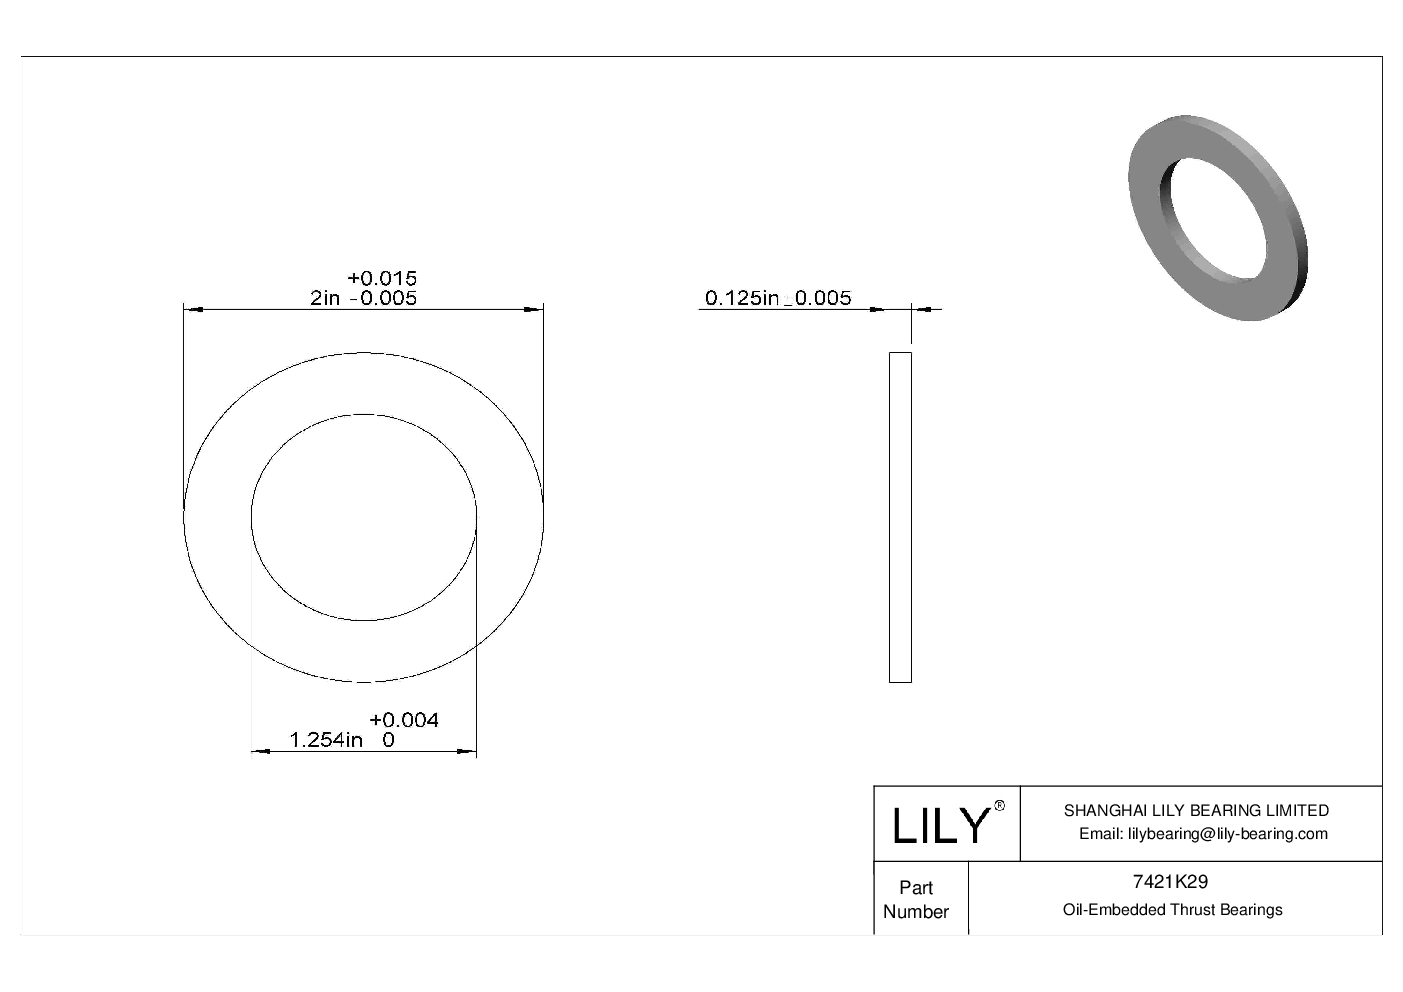 HECBKCJ Ultra-Low-Friction Oil-Embedded Thrust Bearings cad drawing